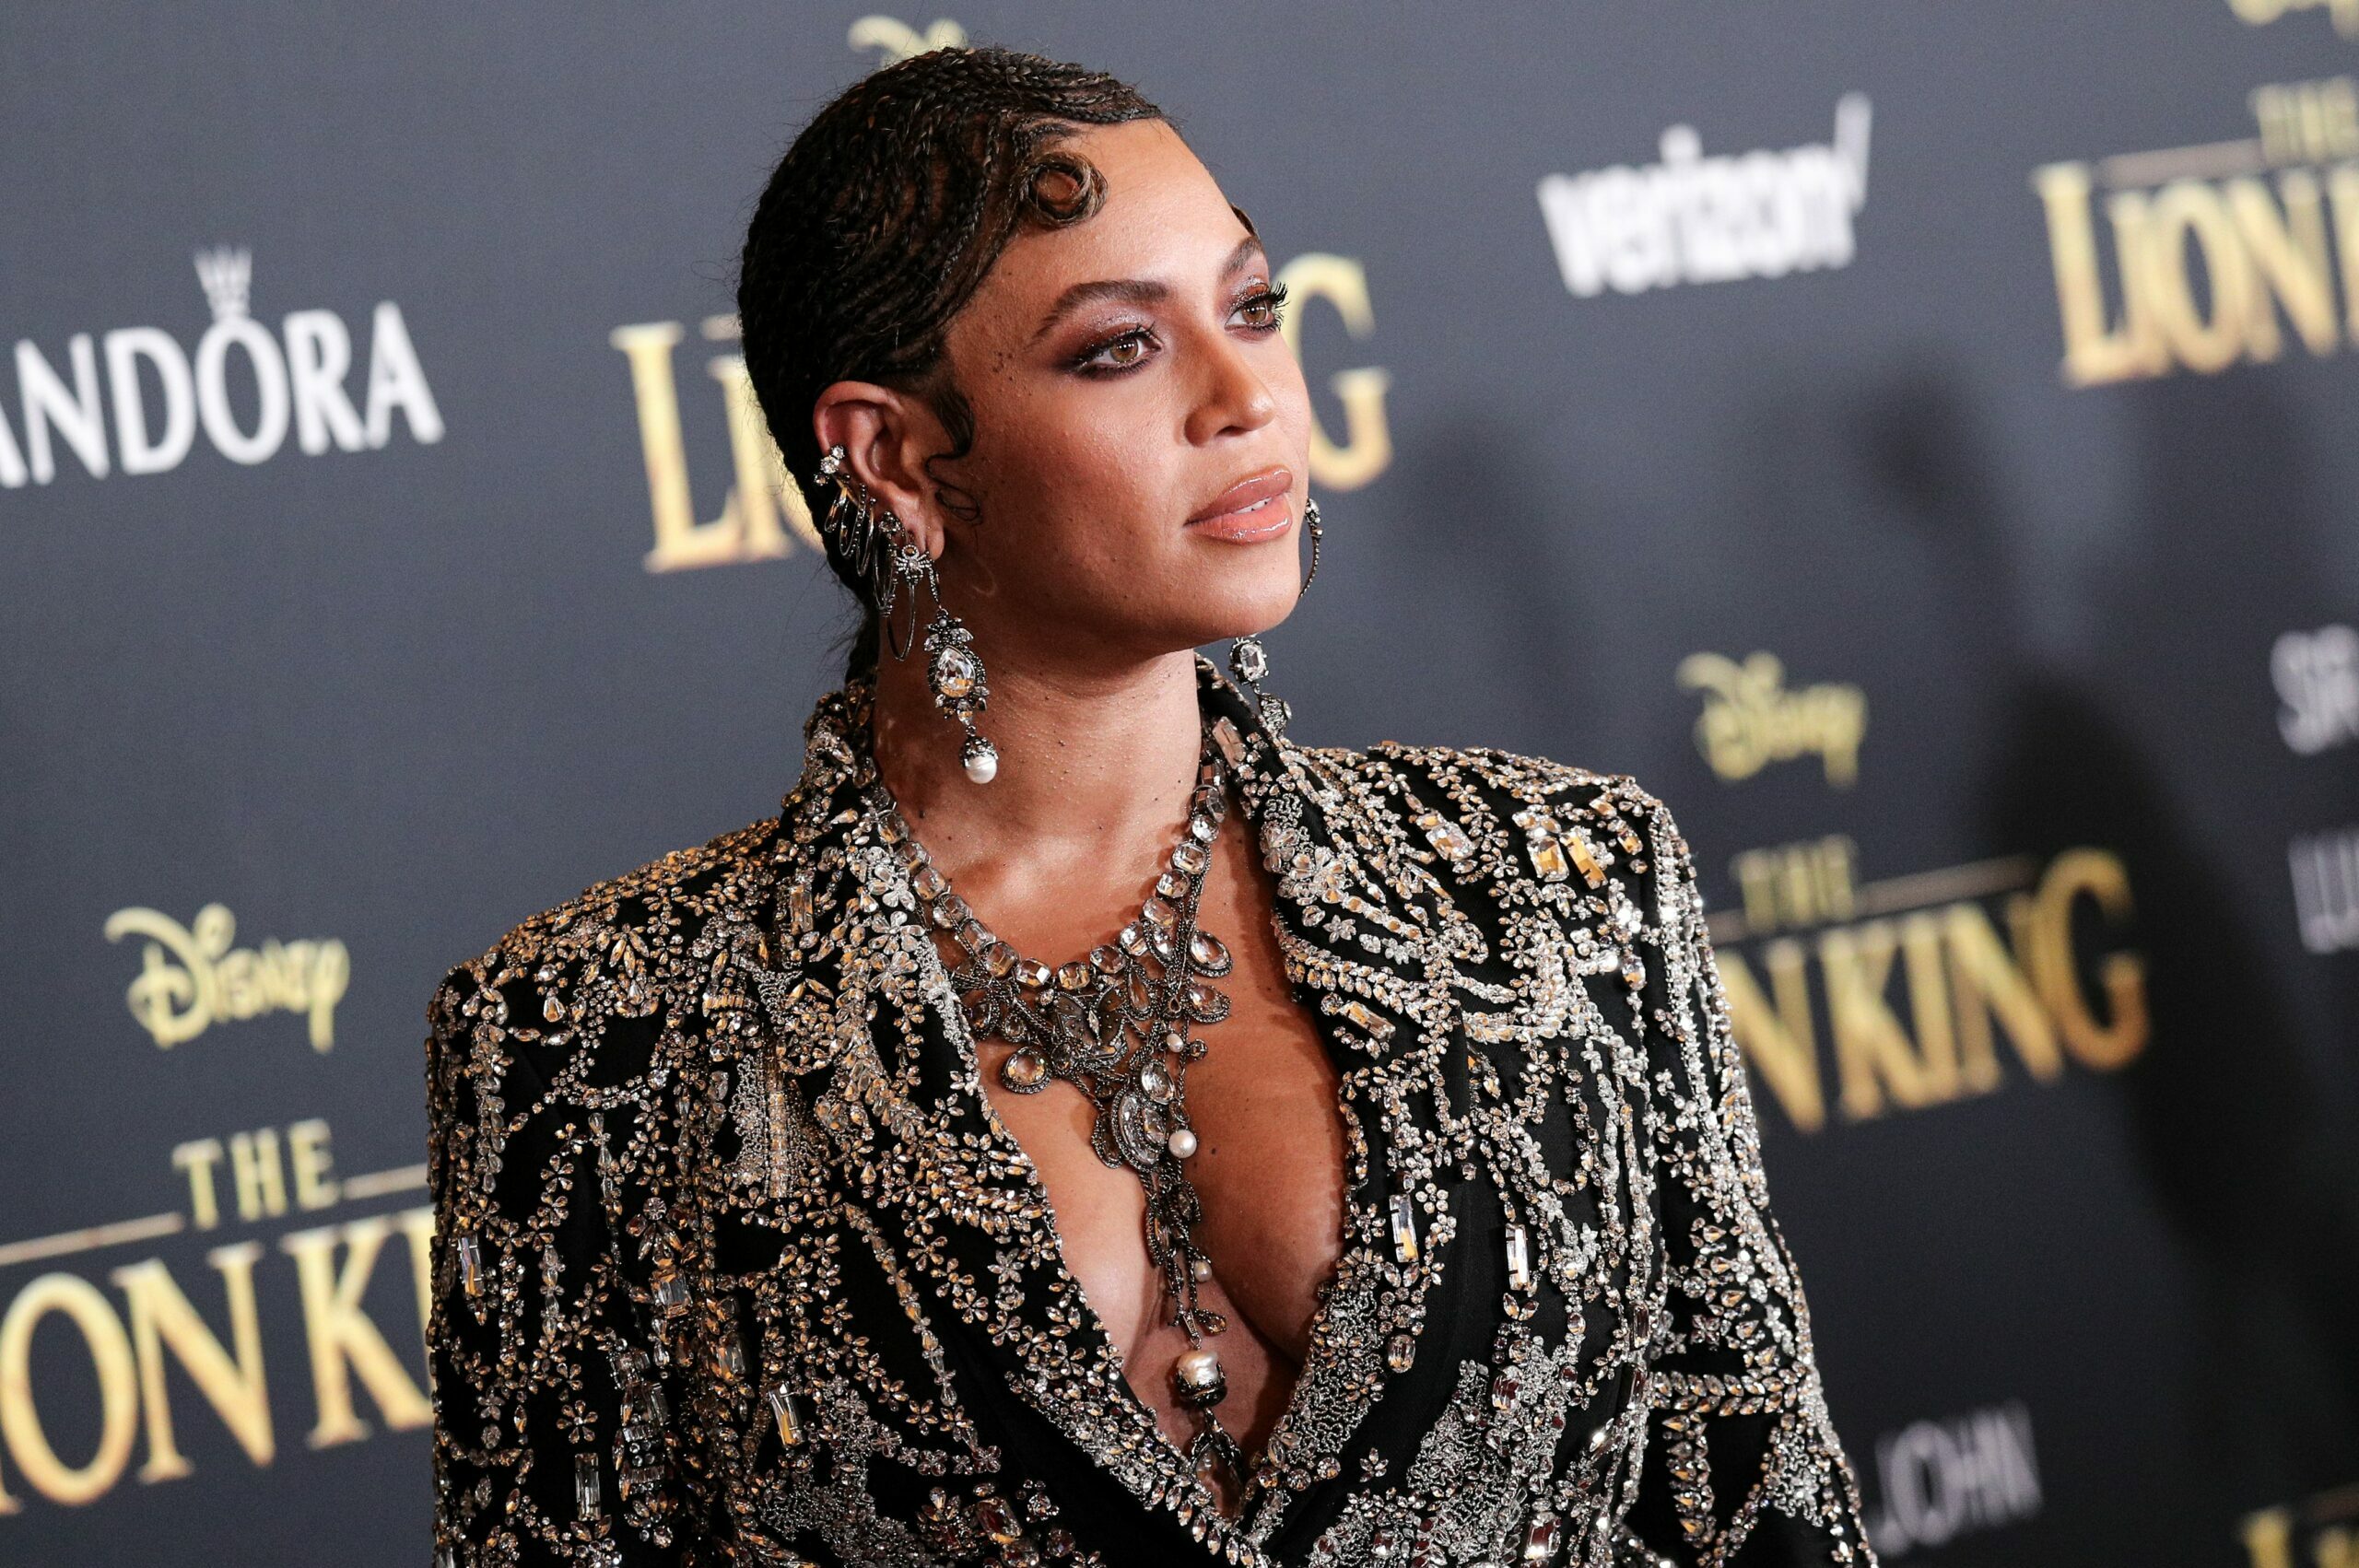 Beyonce robbed of over $1 million worth of valuables in LA